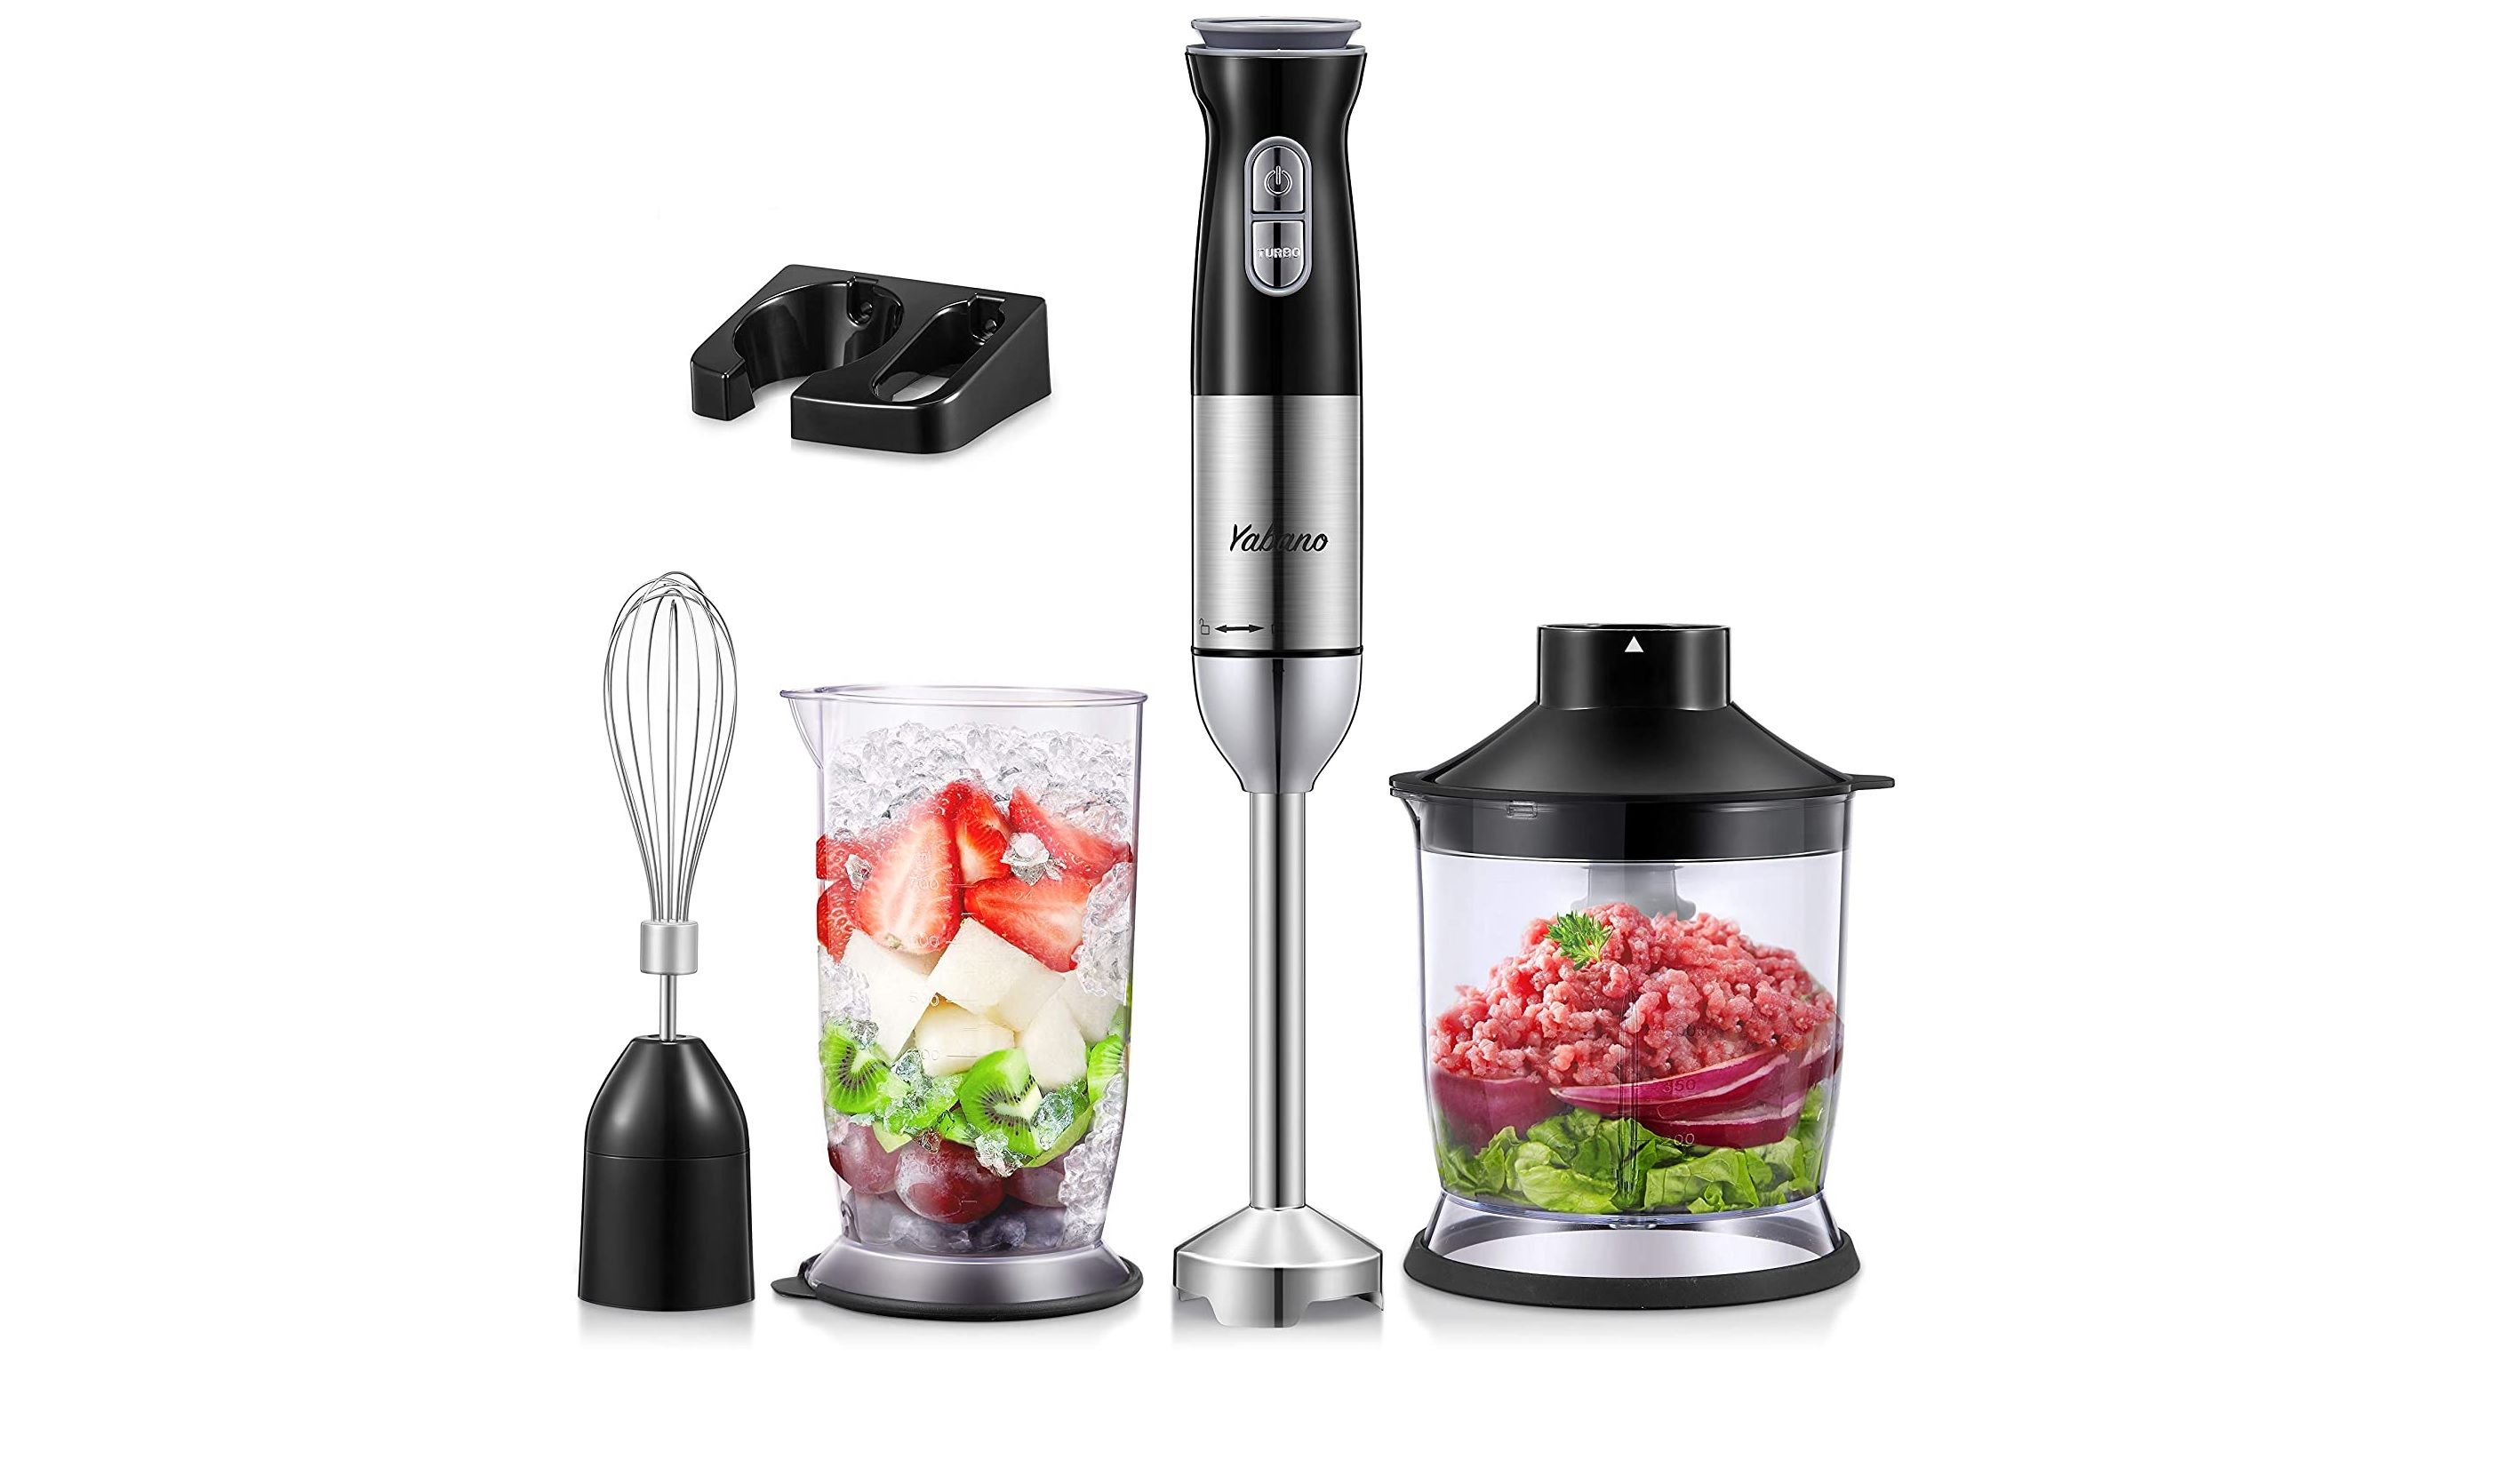 yabano 5-in-1 hand blender set bundled with the yabano 3-in-1 sandwich maker